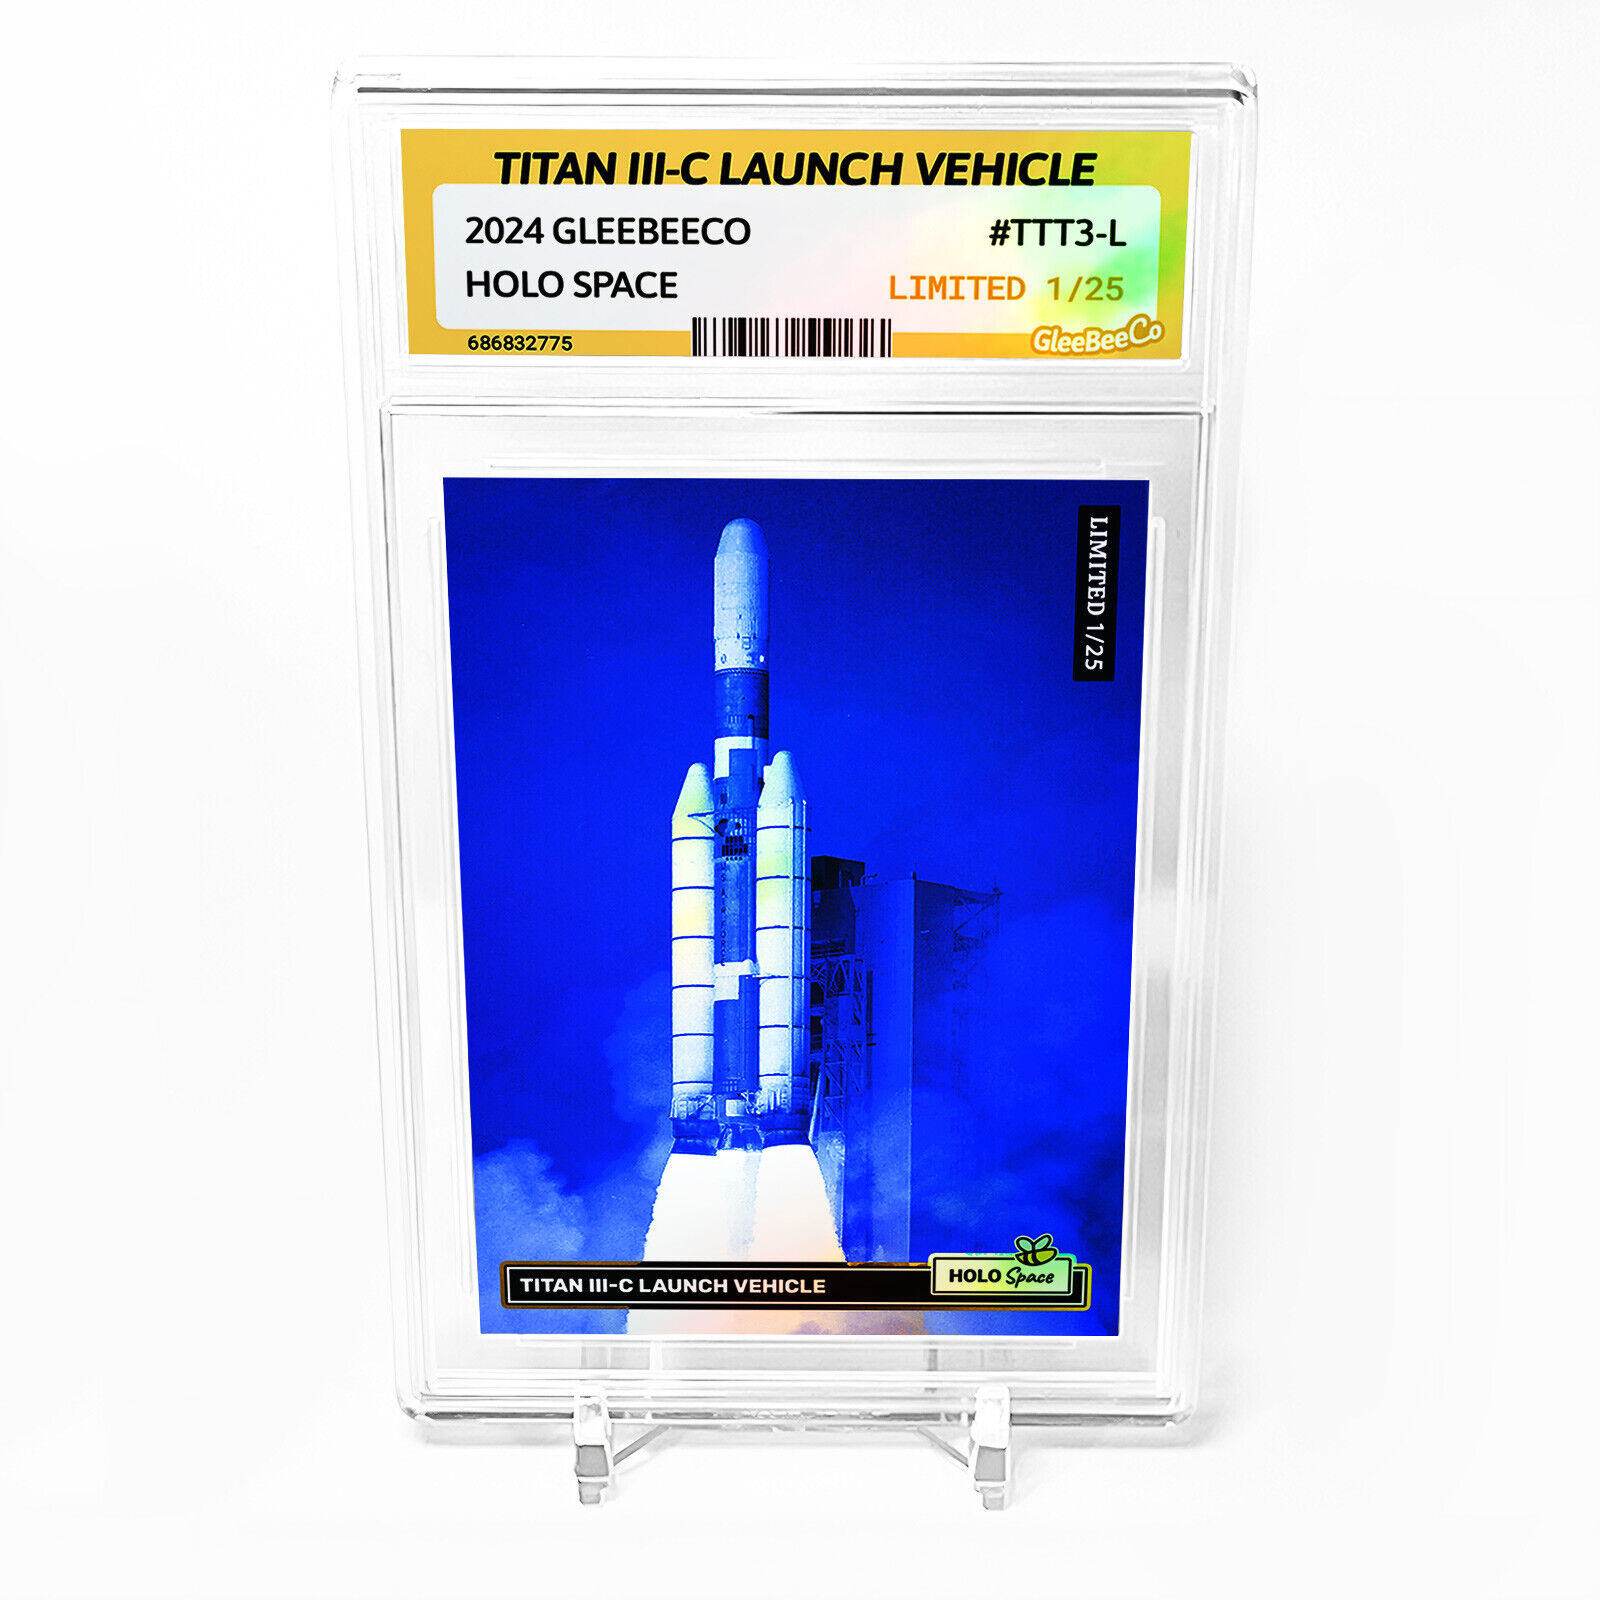 TITAN III-C LAUNCH VEHICLE Card 2024 GleeBeeCo Holo Space #TTT3-L Limited to /25